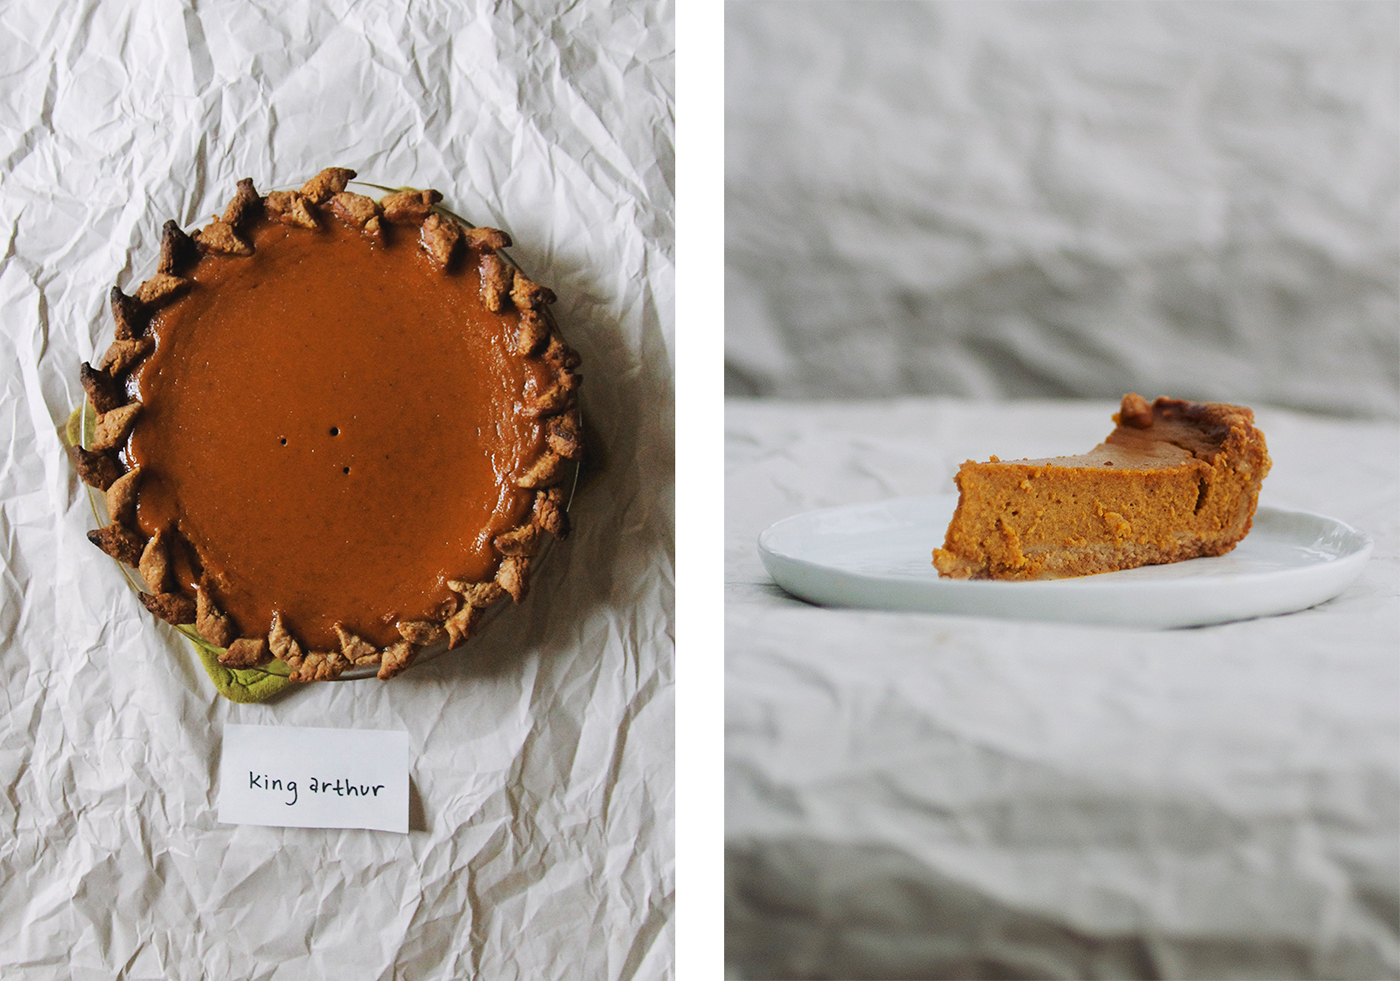 From left to right: Overhead view and sideview of King Arthur Flour's pumpkin pie recipe